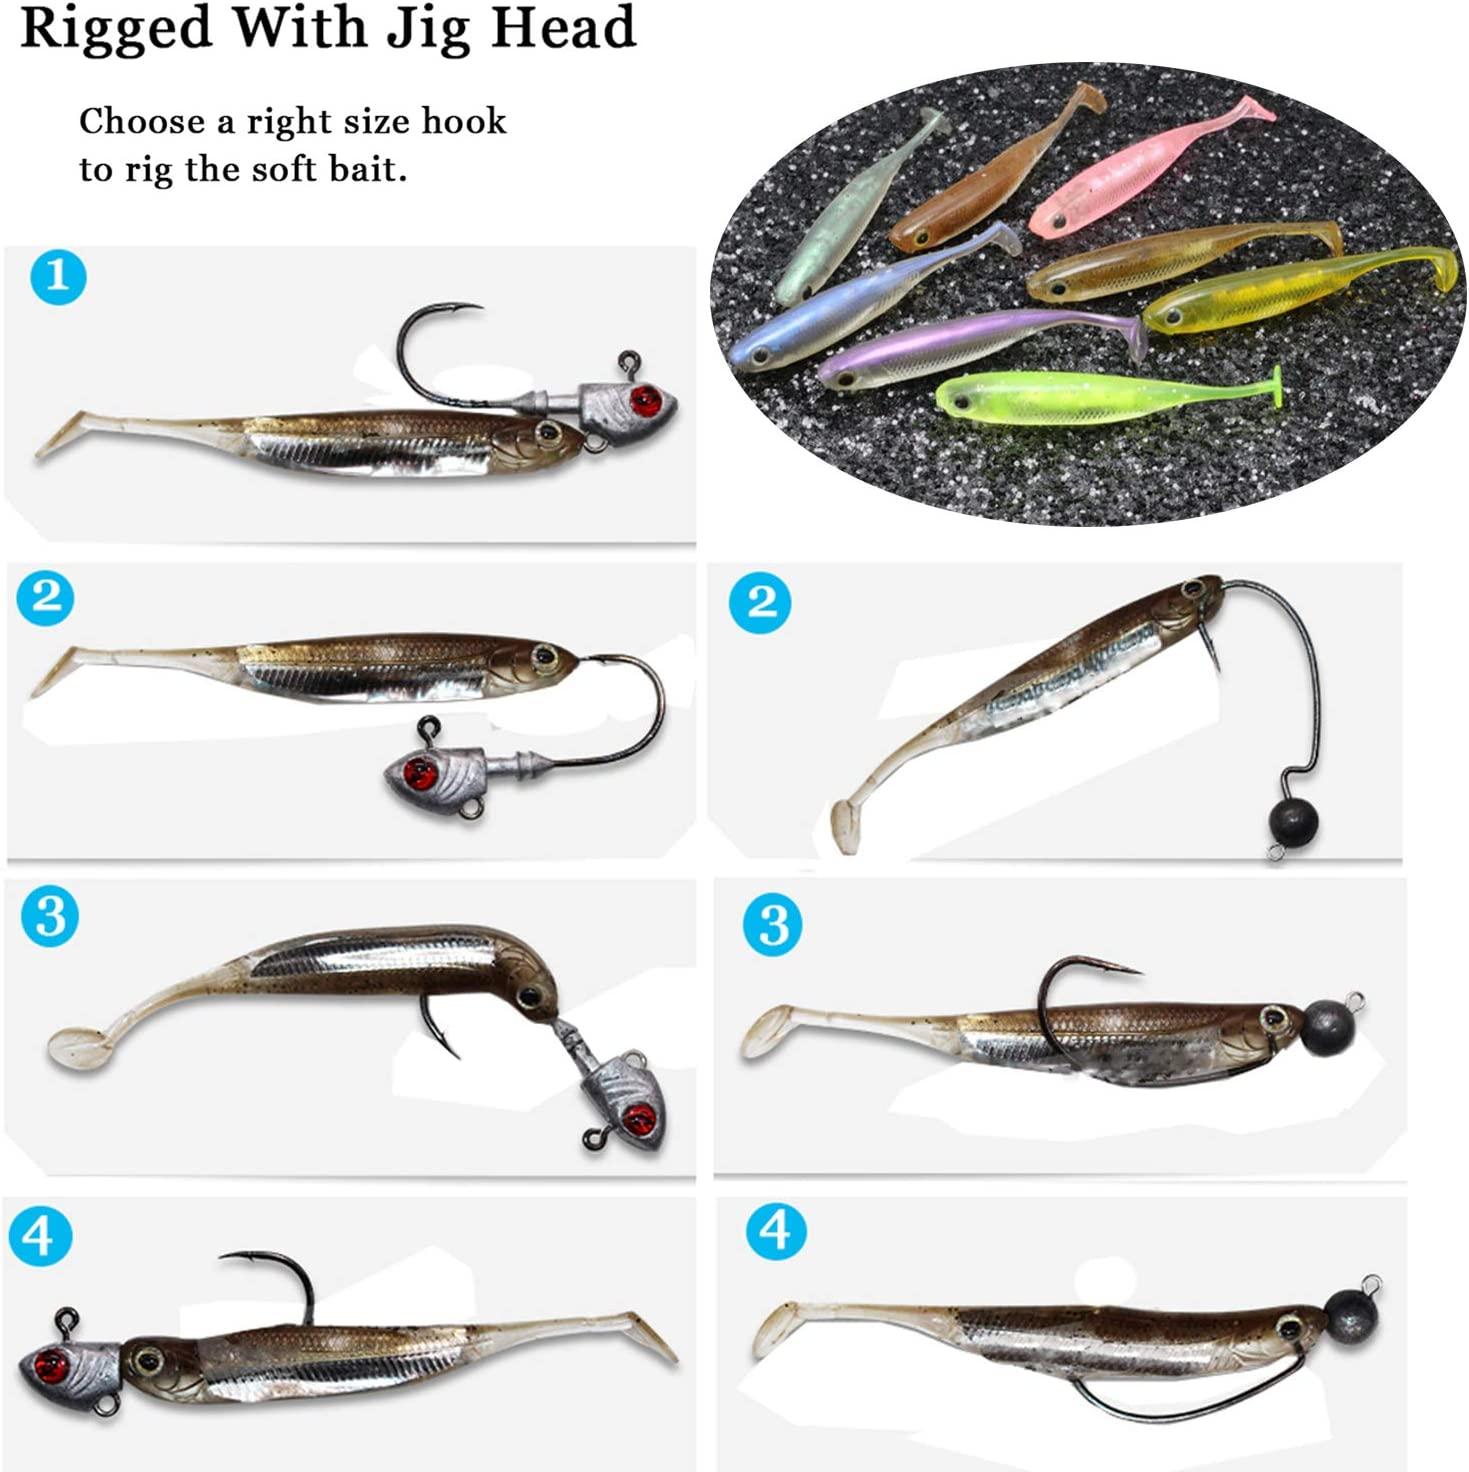 QualyQualy Soft Plastic Swimbait Paddle Tail Shad Lure Soft Bass Shad Bait  Shad Minnow Paddle Tail Swim Bait for Bass Trout Walleye Crappie 2.75in  3.14in 3.94in 5in 1# 2.75in - 6Pcs